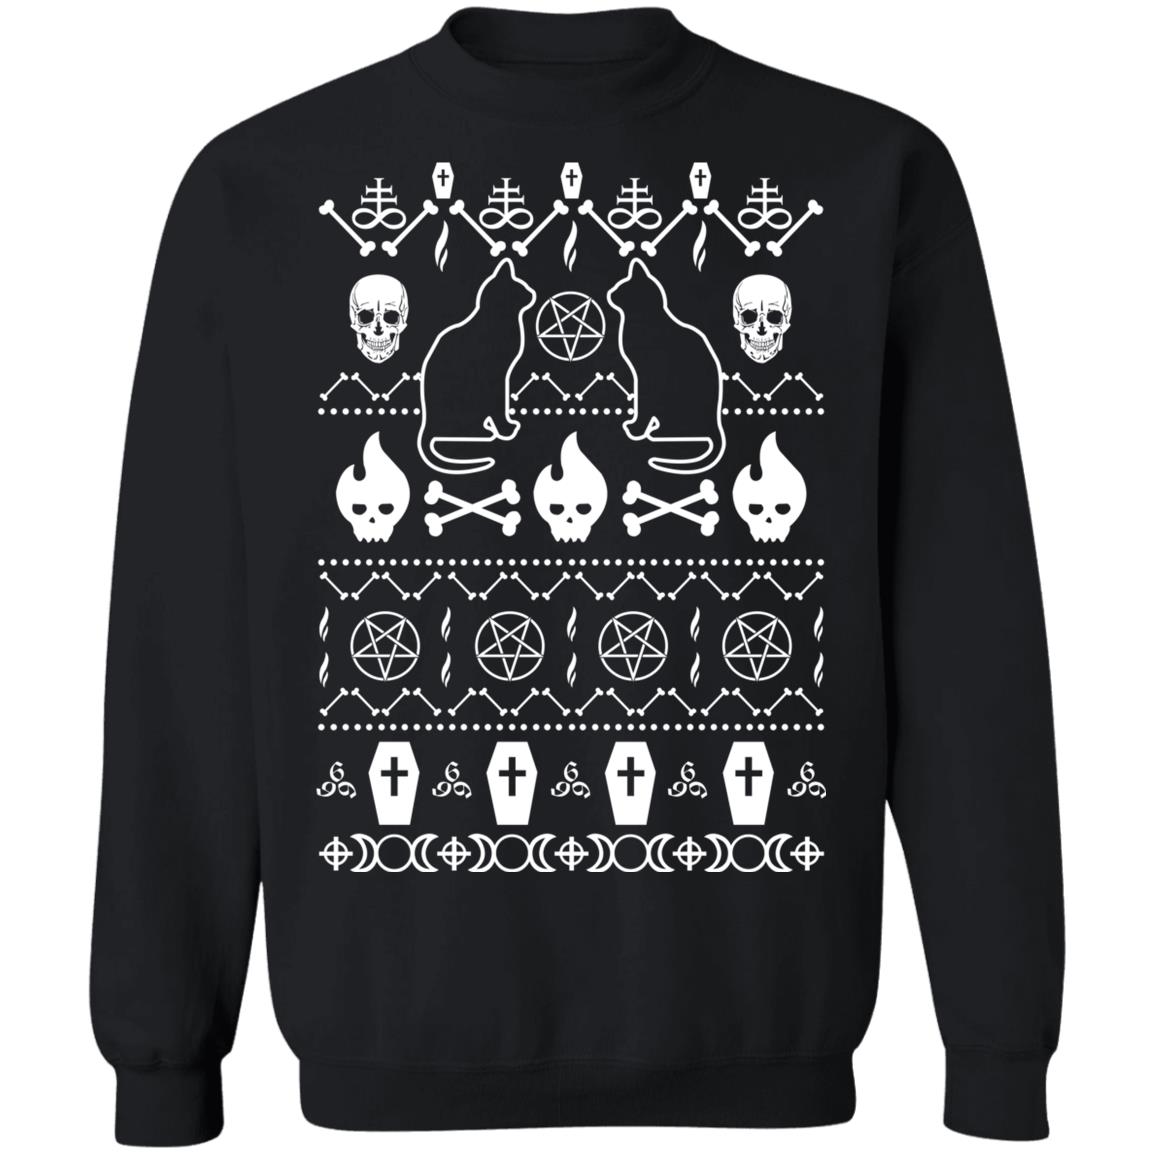 anvesha singh recommends Goth Ugly Christmas Sweater